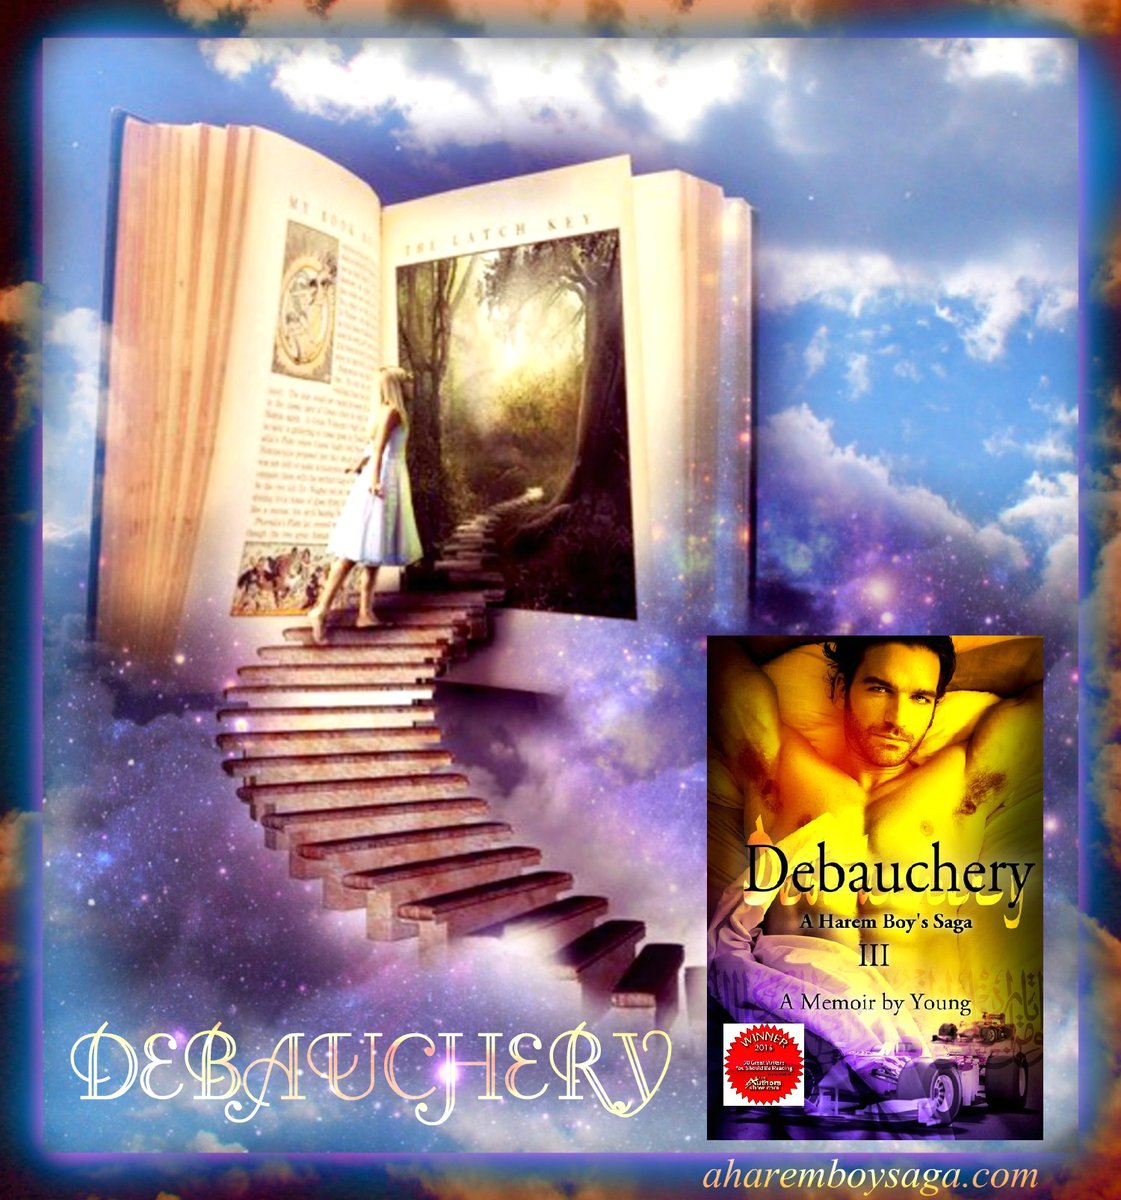 The Magical Power of the Written Word. DEBAUCHERY getBook.at/DEBAUCHERY is the 3rd book to an autobiography of a young man's enlightening coming-of-age secret education in a male harem known only to a few. #AuthorUproar #BookBoost